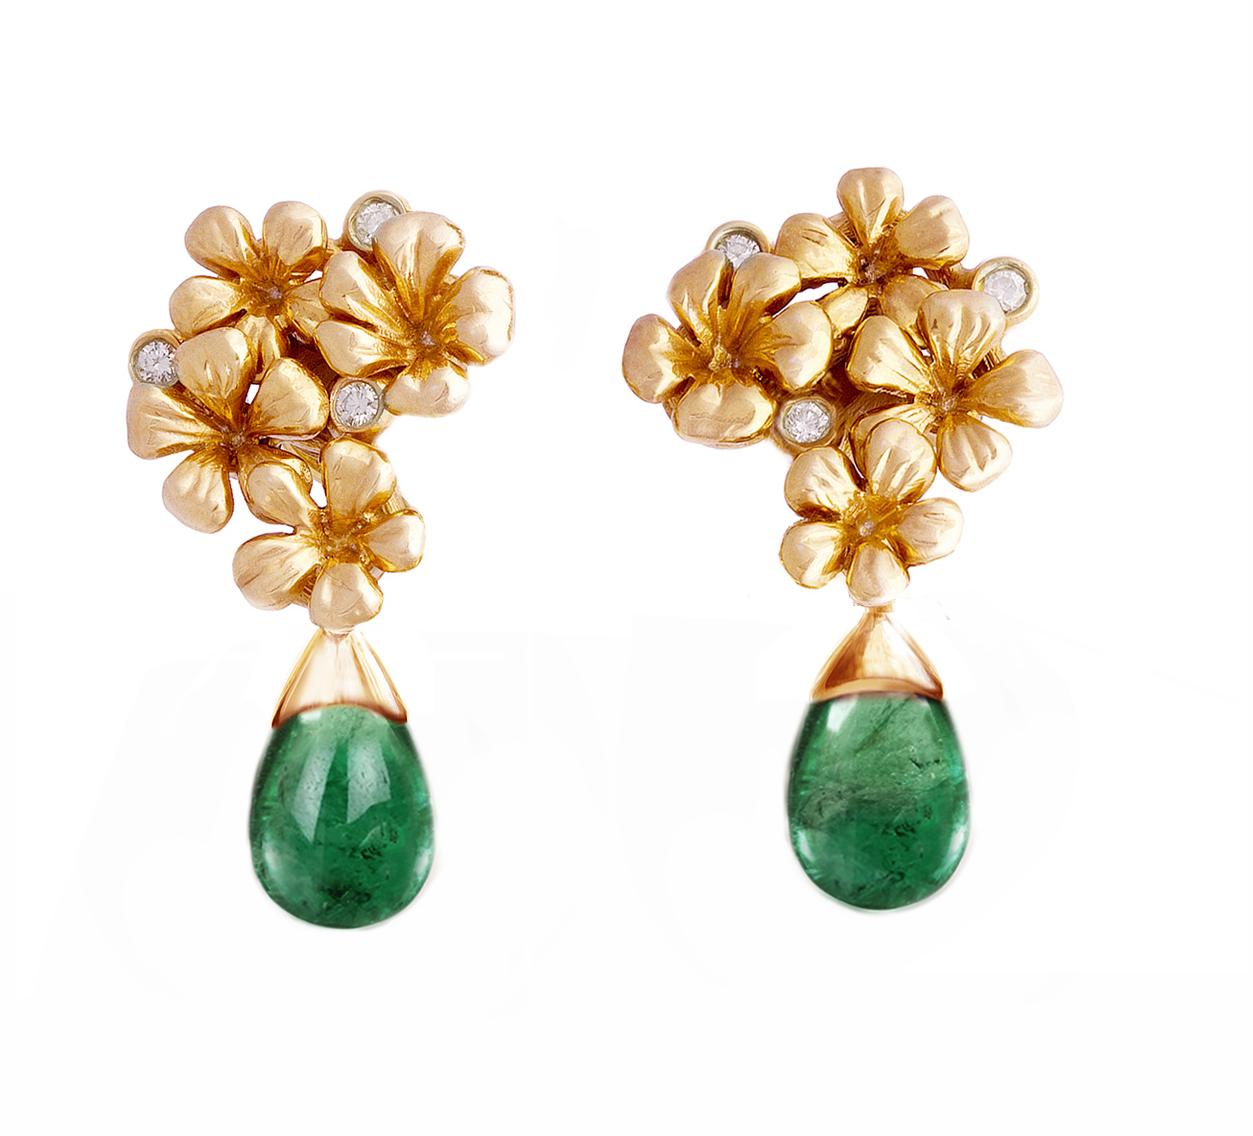 These clip-on contemporary earrings are made of 18-karat rose gold and are adorned with six round diamonds and natural cabochon removable emeralds. The drops can be taken on or off, making the earrings versatile as you can replace the cabochon drops